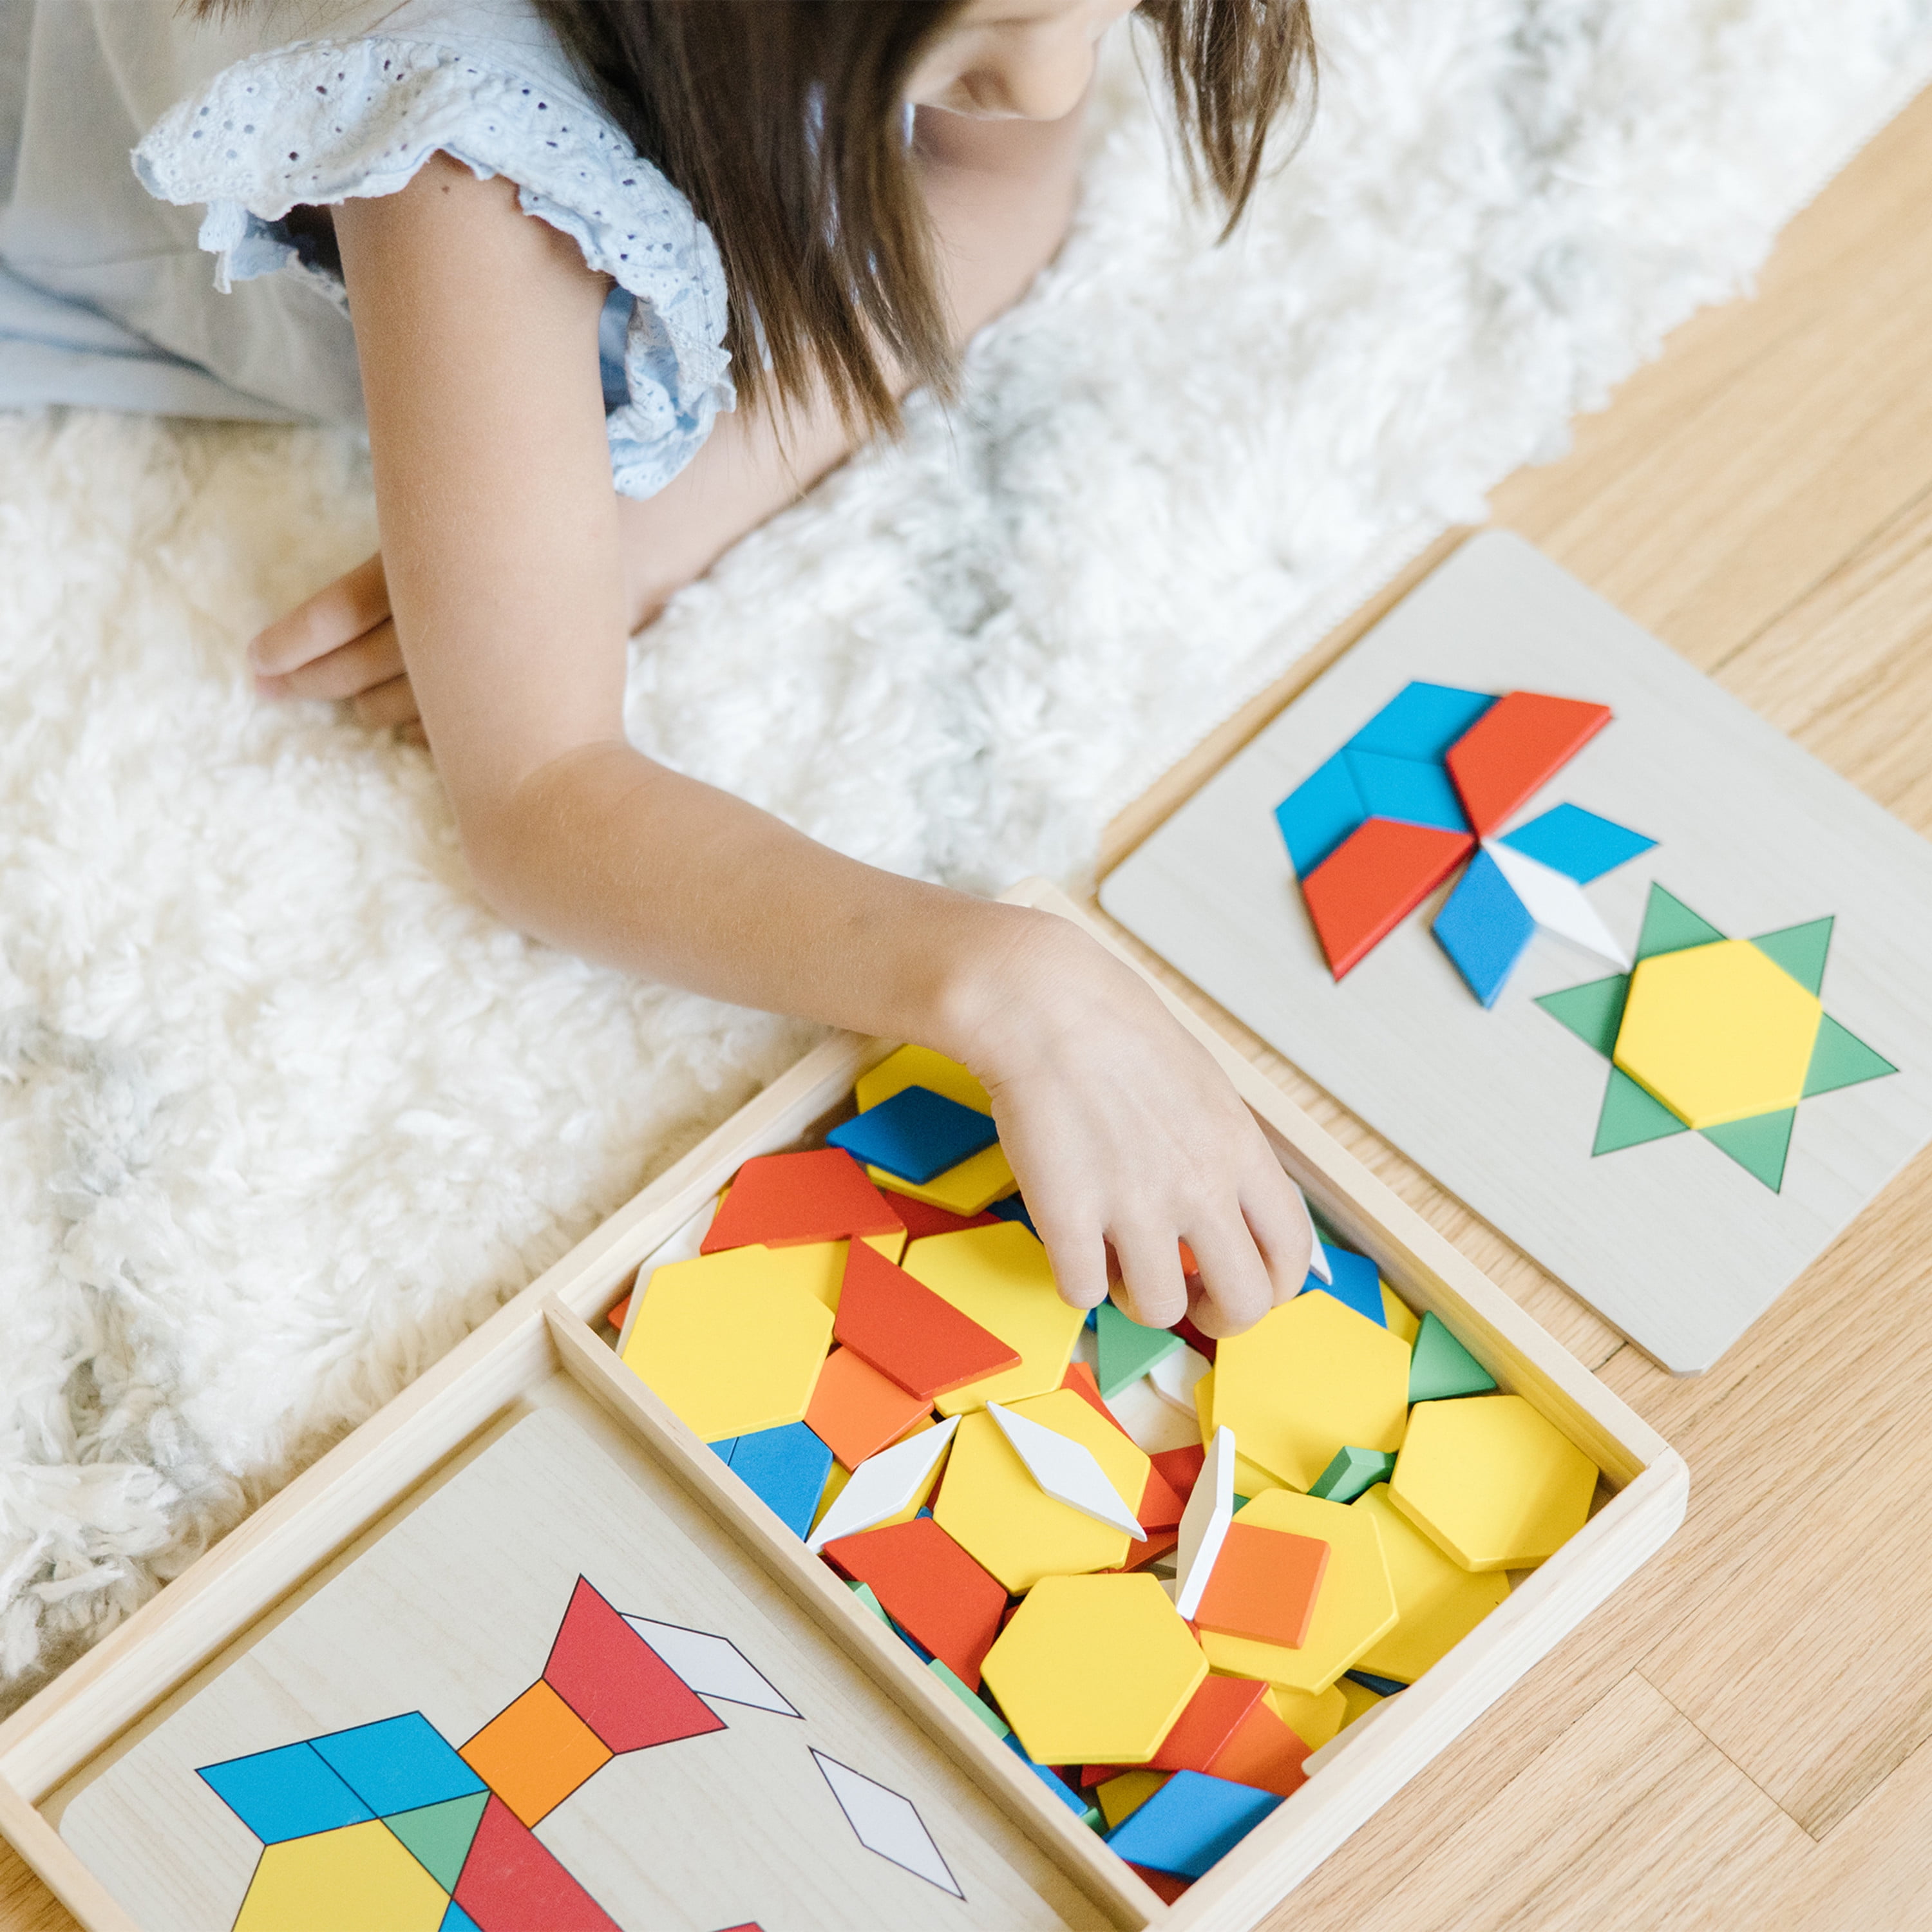  Melissa & Doug Pattern Blocks and Boards - Wooden Classic Toy  With 120 Solid Wood Shapes and 5 Double-Sided Panels, Multi-colored - STEAM  Animals, Tangrams Puzzle For Kids Ages 3+ 